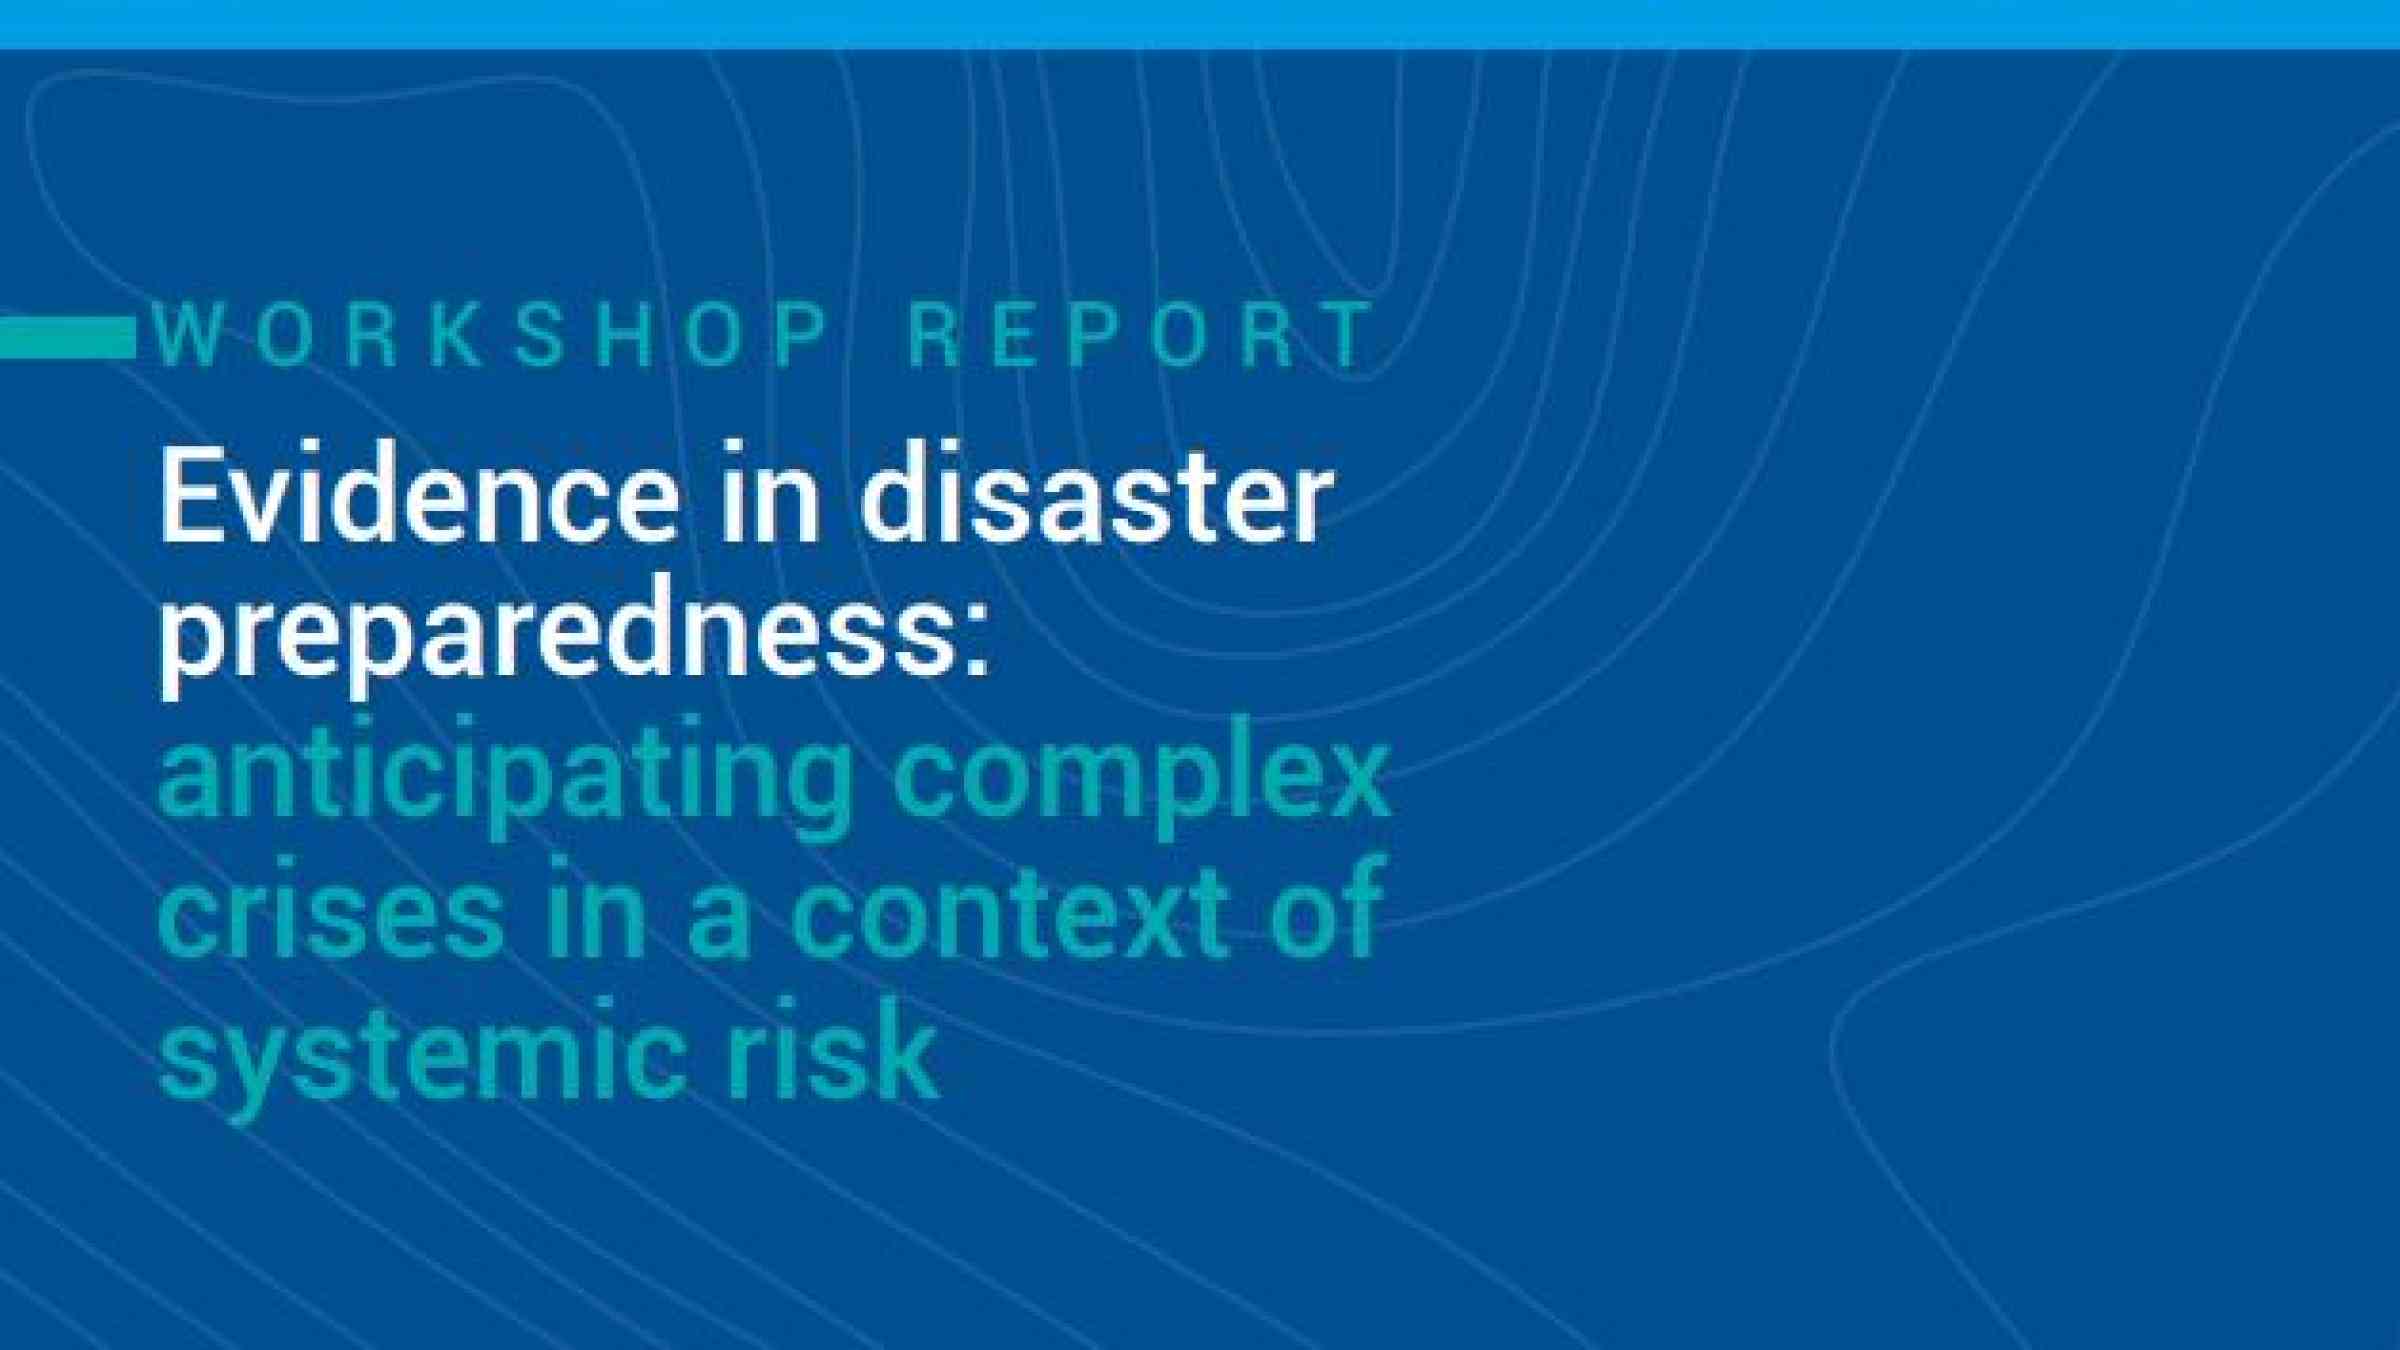 UNDRR & ECHO: Evidence in disaster preparedness - anticipating complex crises in a context of systemic risk